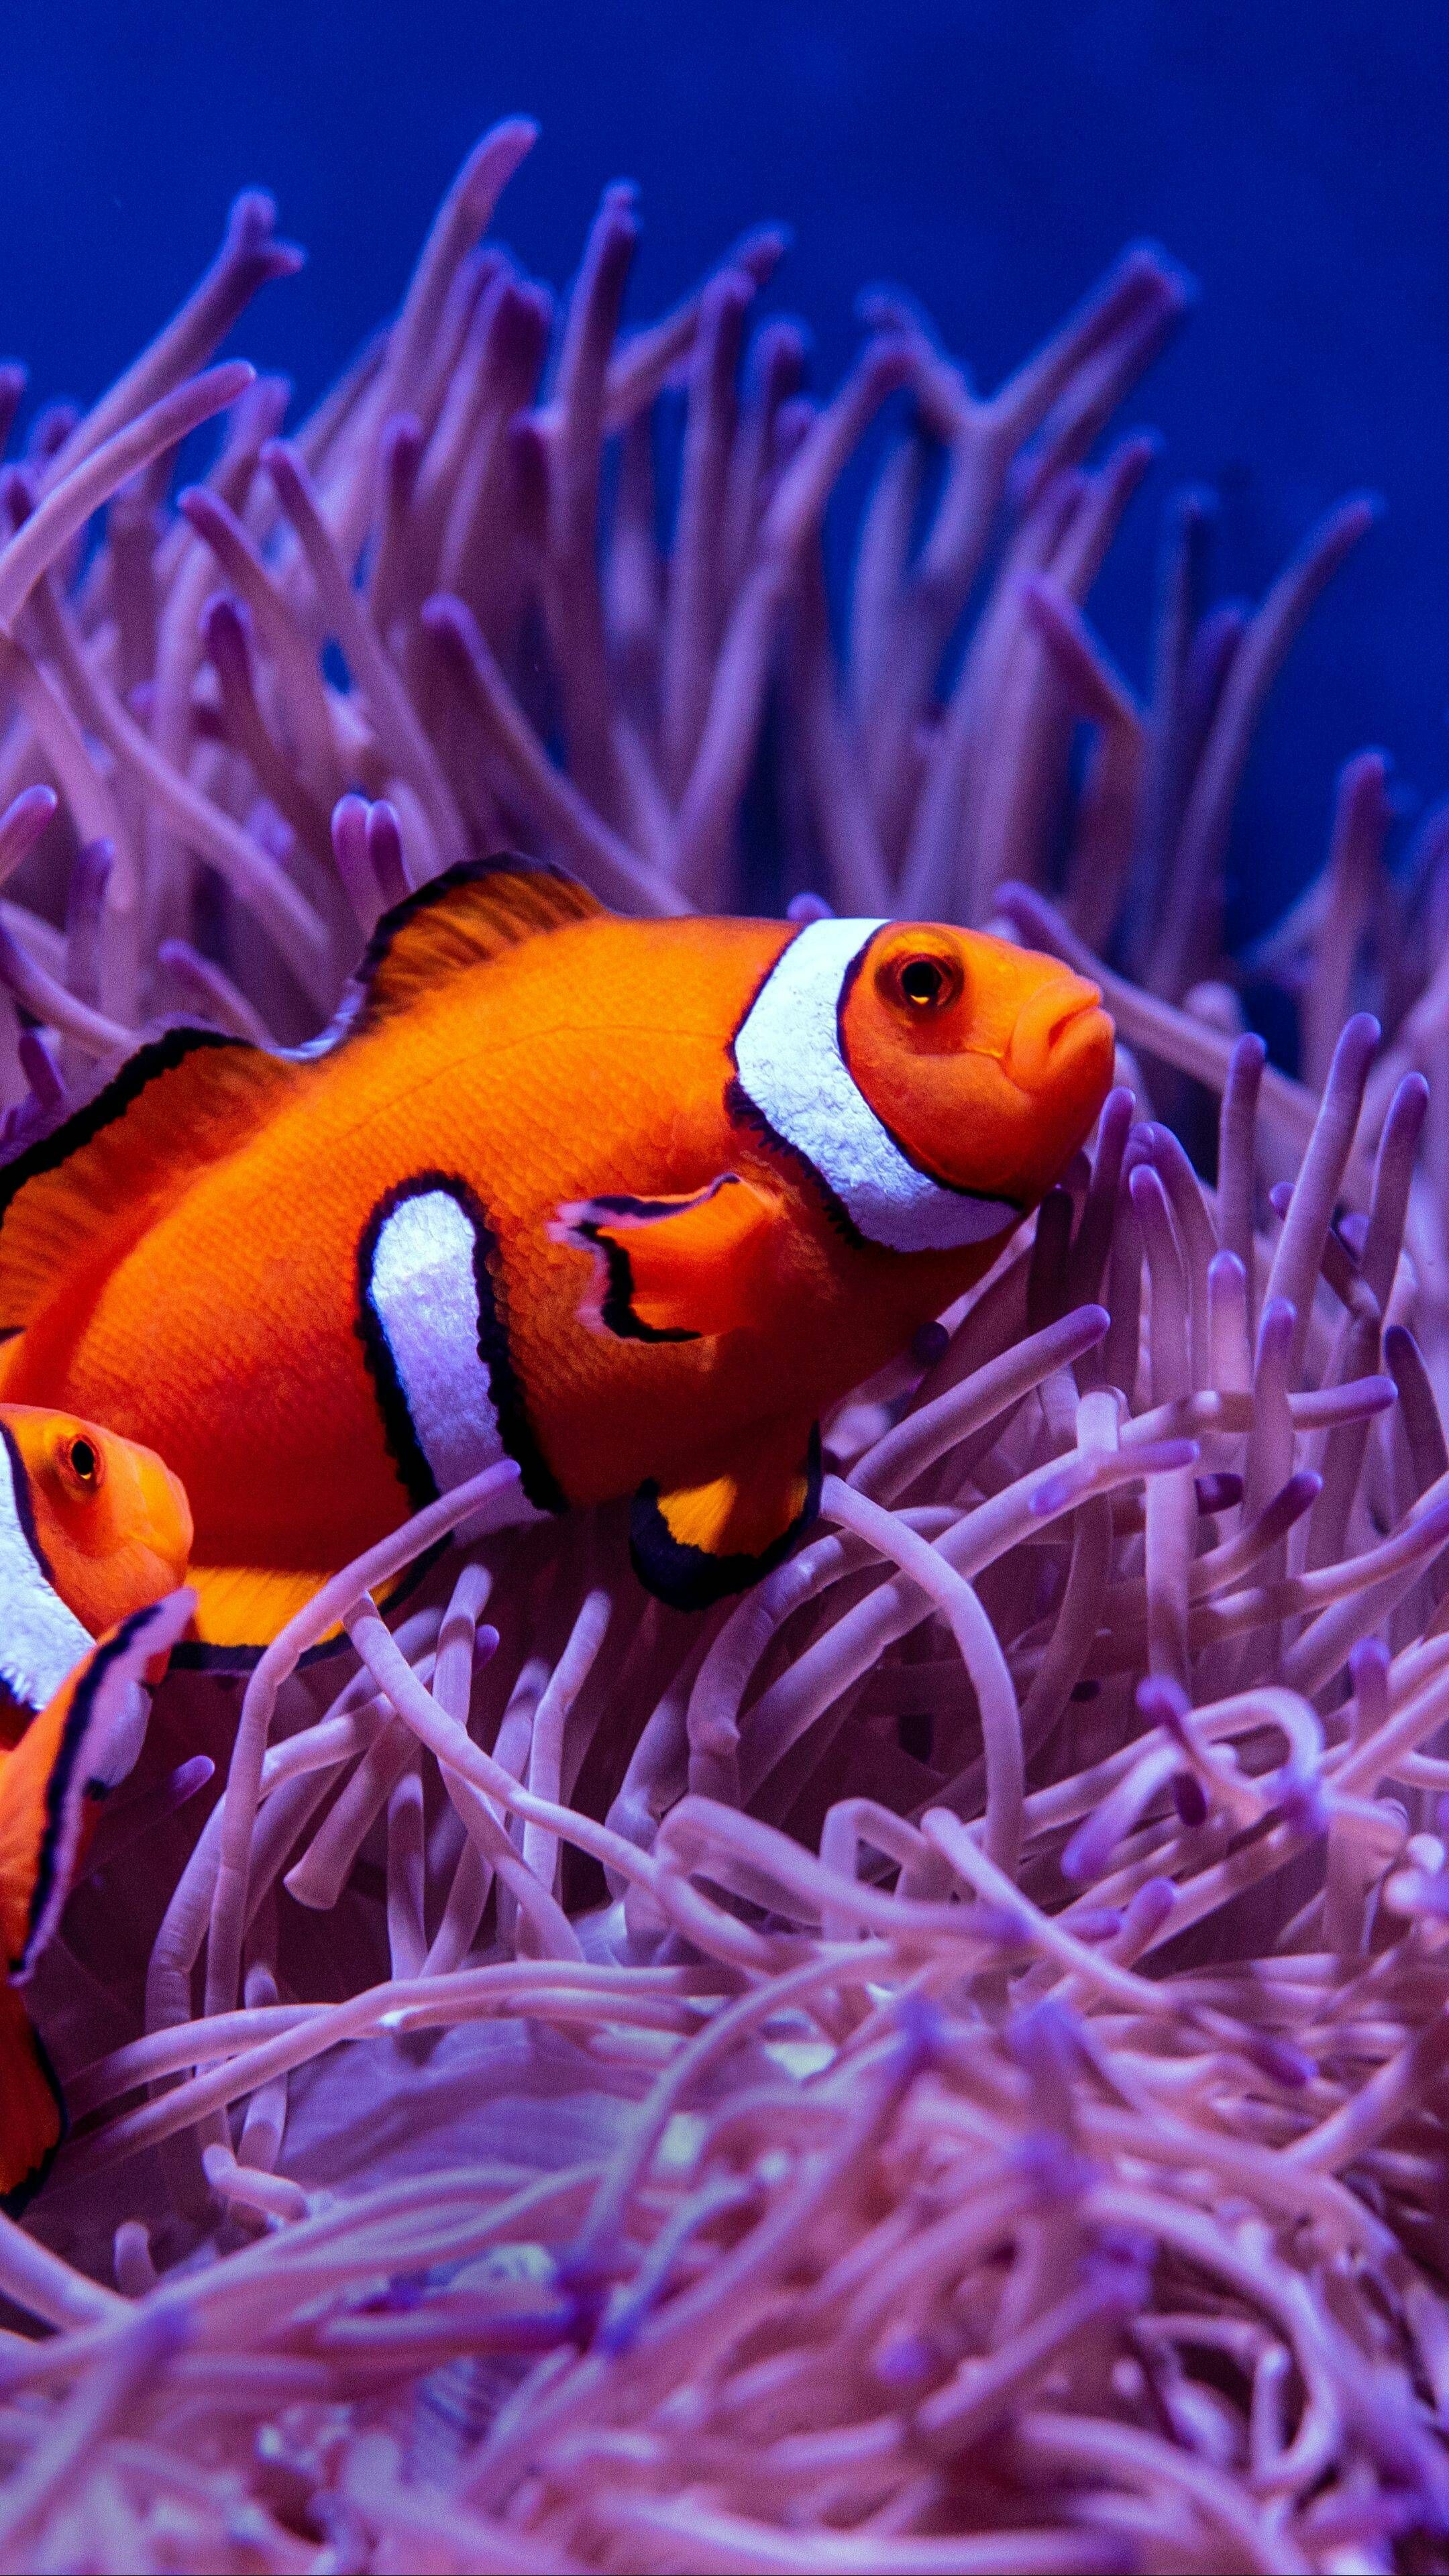 Coral Reef: Most reefs were formed after the Last Glacial Period when melting ice caused the sea level to rise and flood continental shelves, Anemone fish. 2160x3840 4K Background.